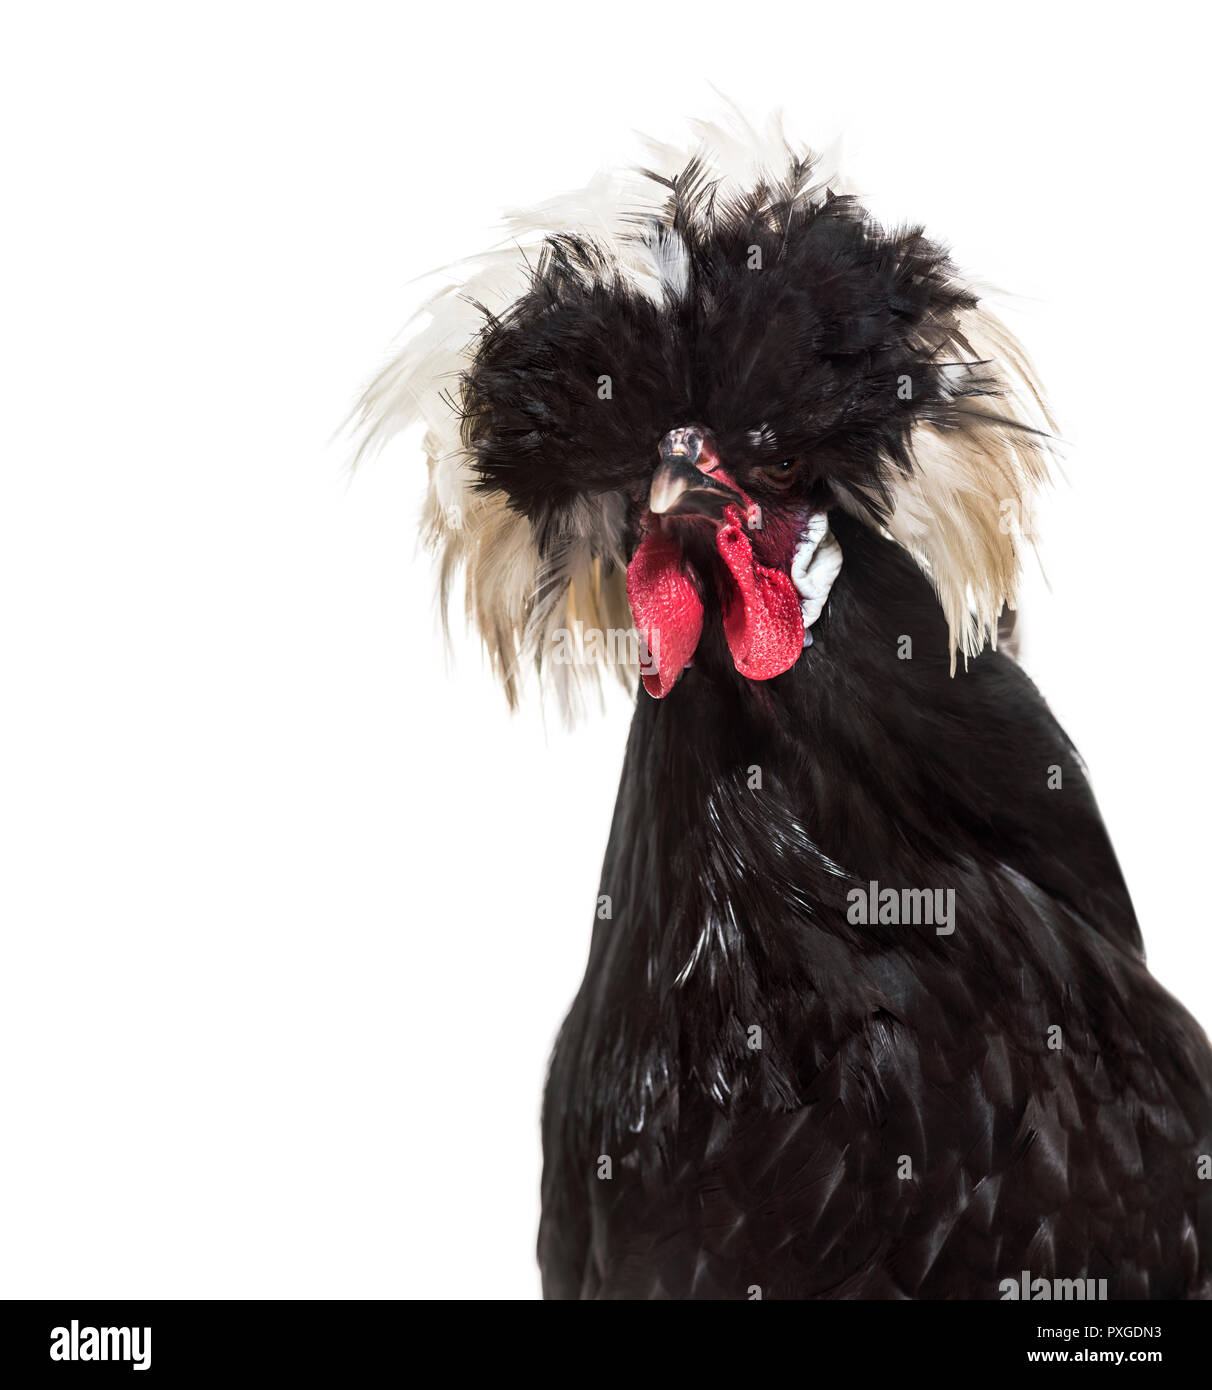 Dutch Rooster against white background Banque D'Images